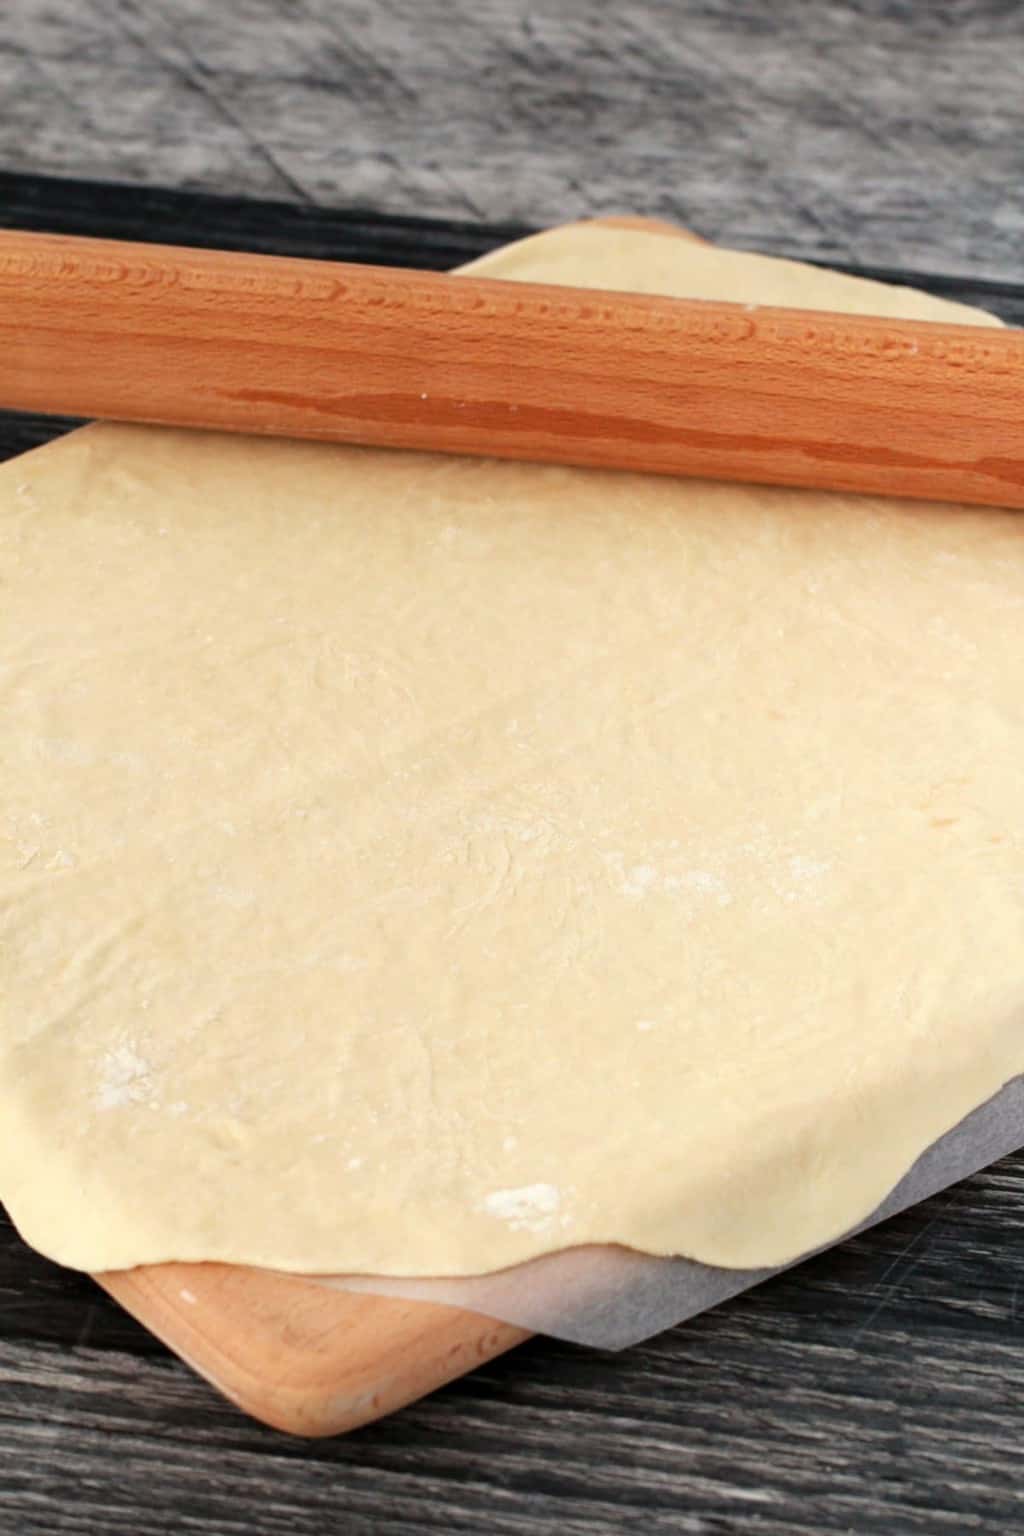 Rolled out pizza dough on a wooden board with a rolling pin on top